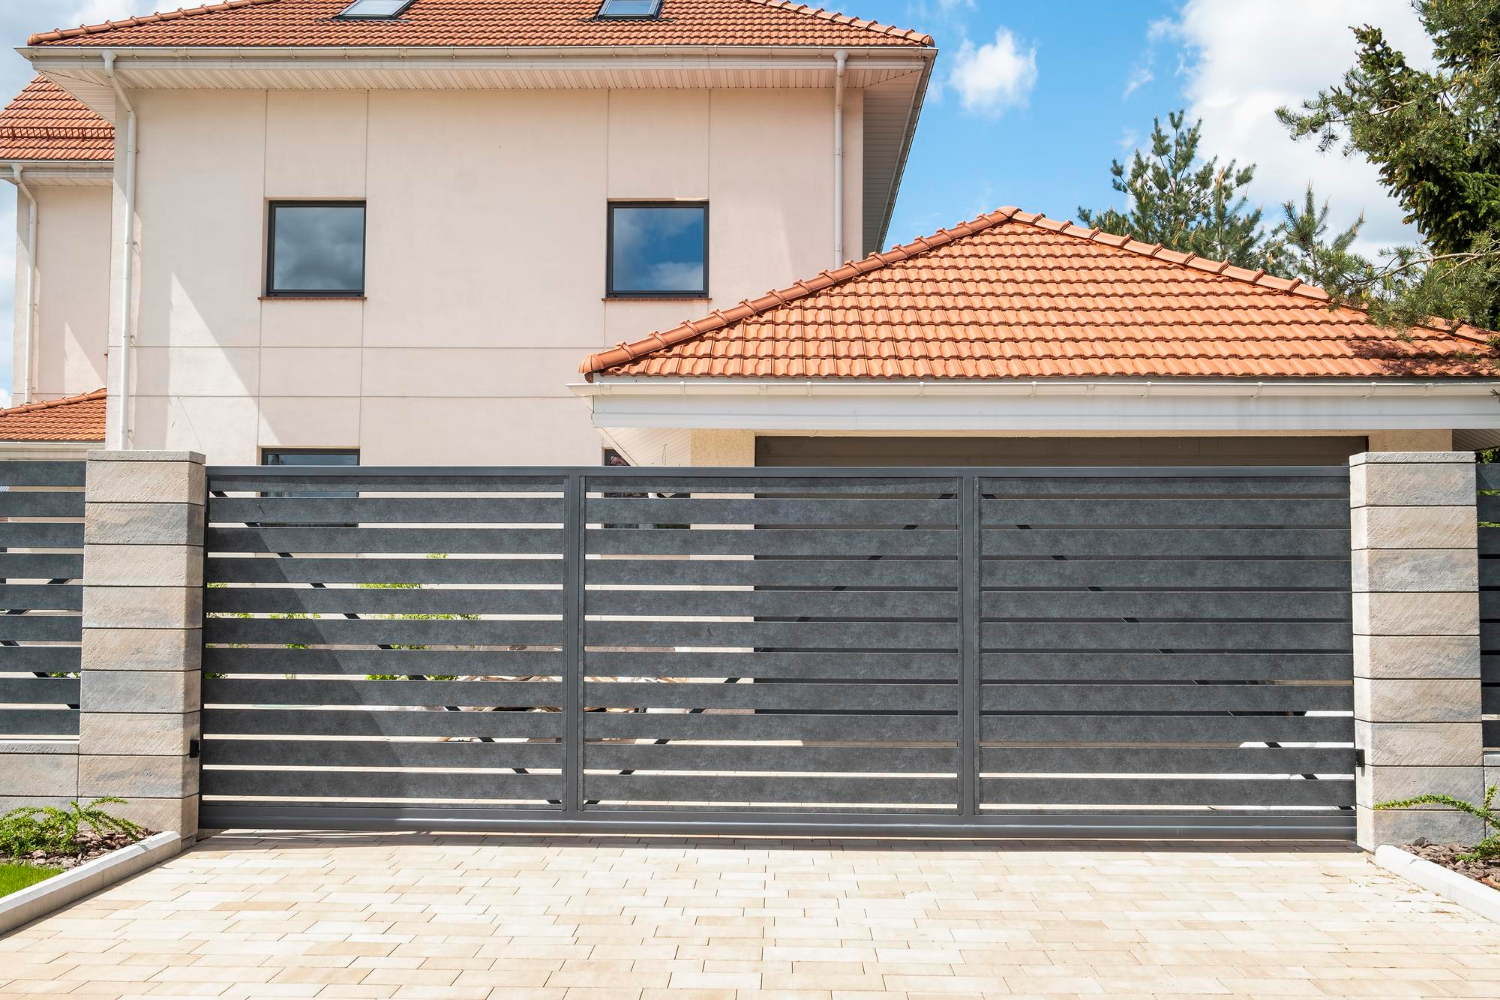 5 Reasons Why Your Home Needs a Decorative Fence